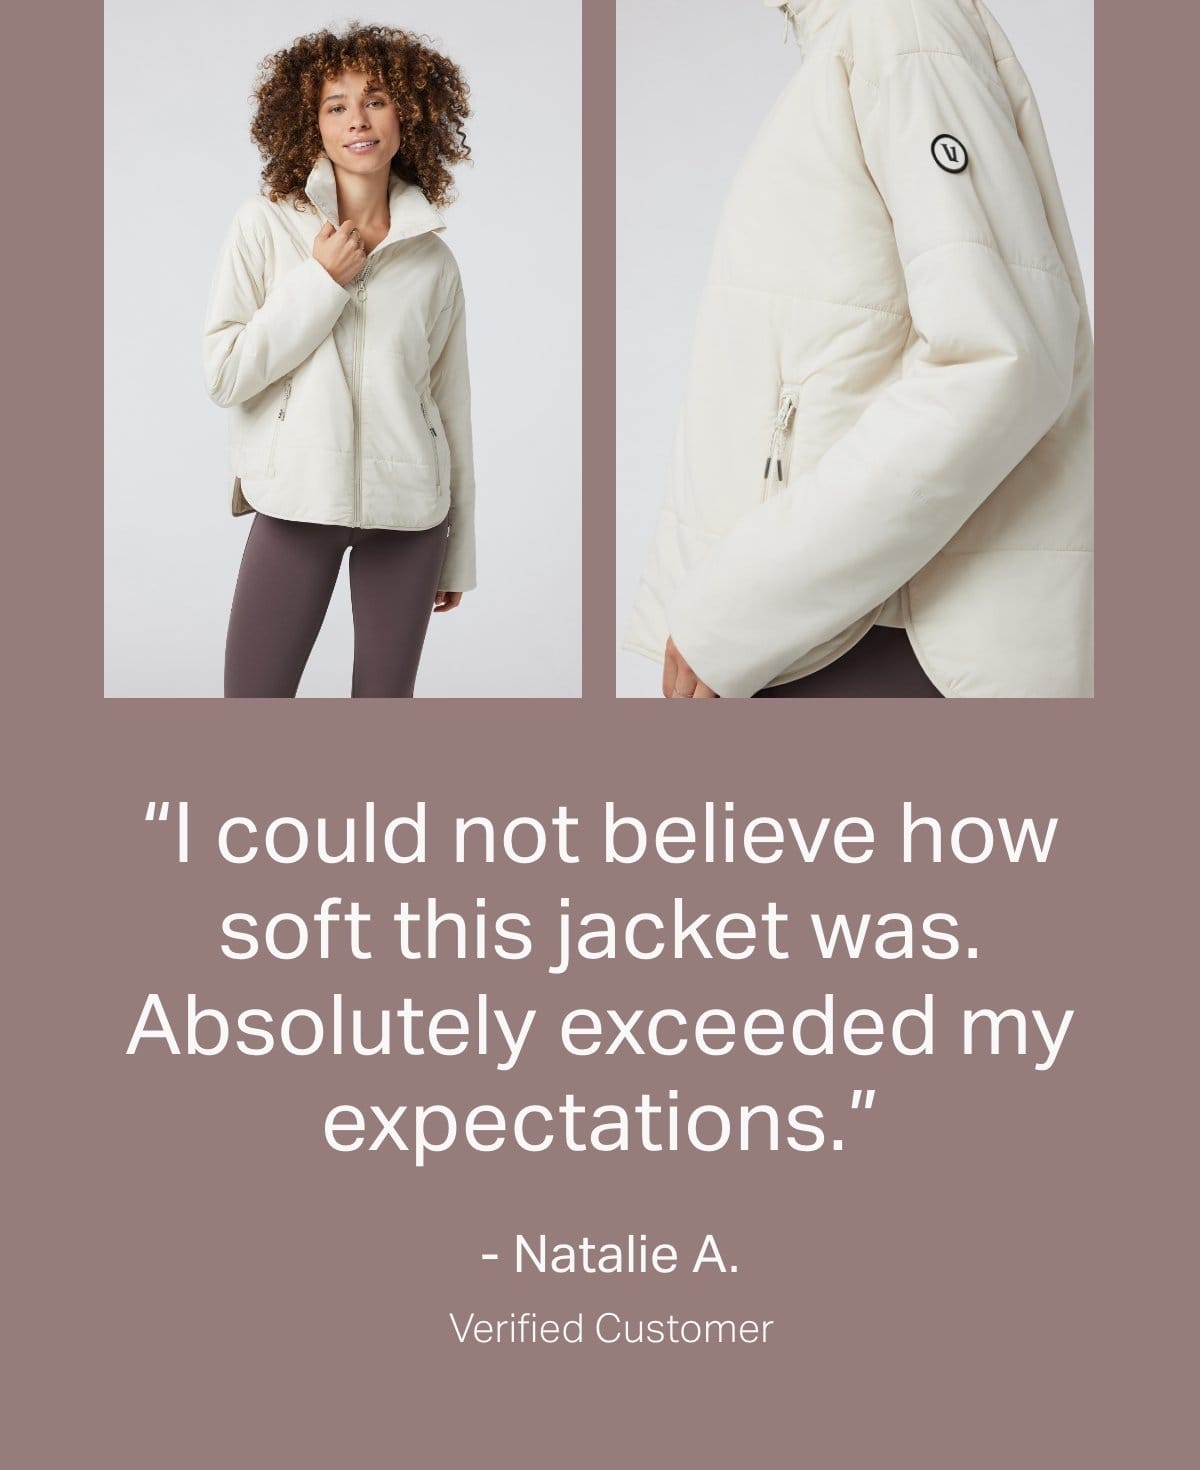 "I could not believe how soft this jacket was."